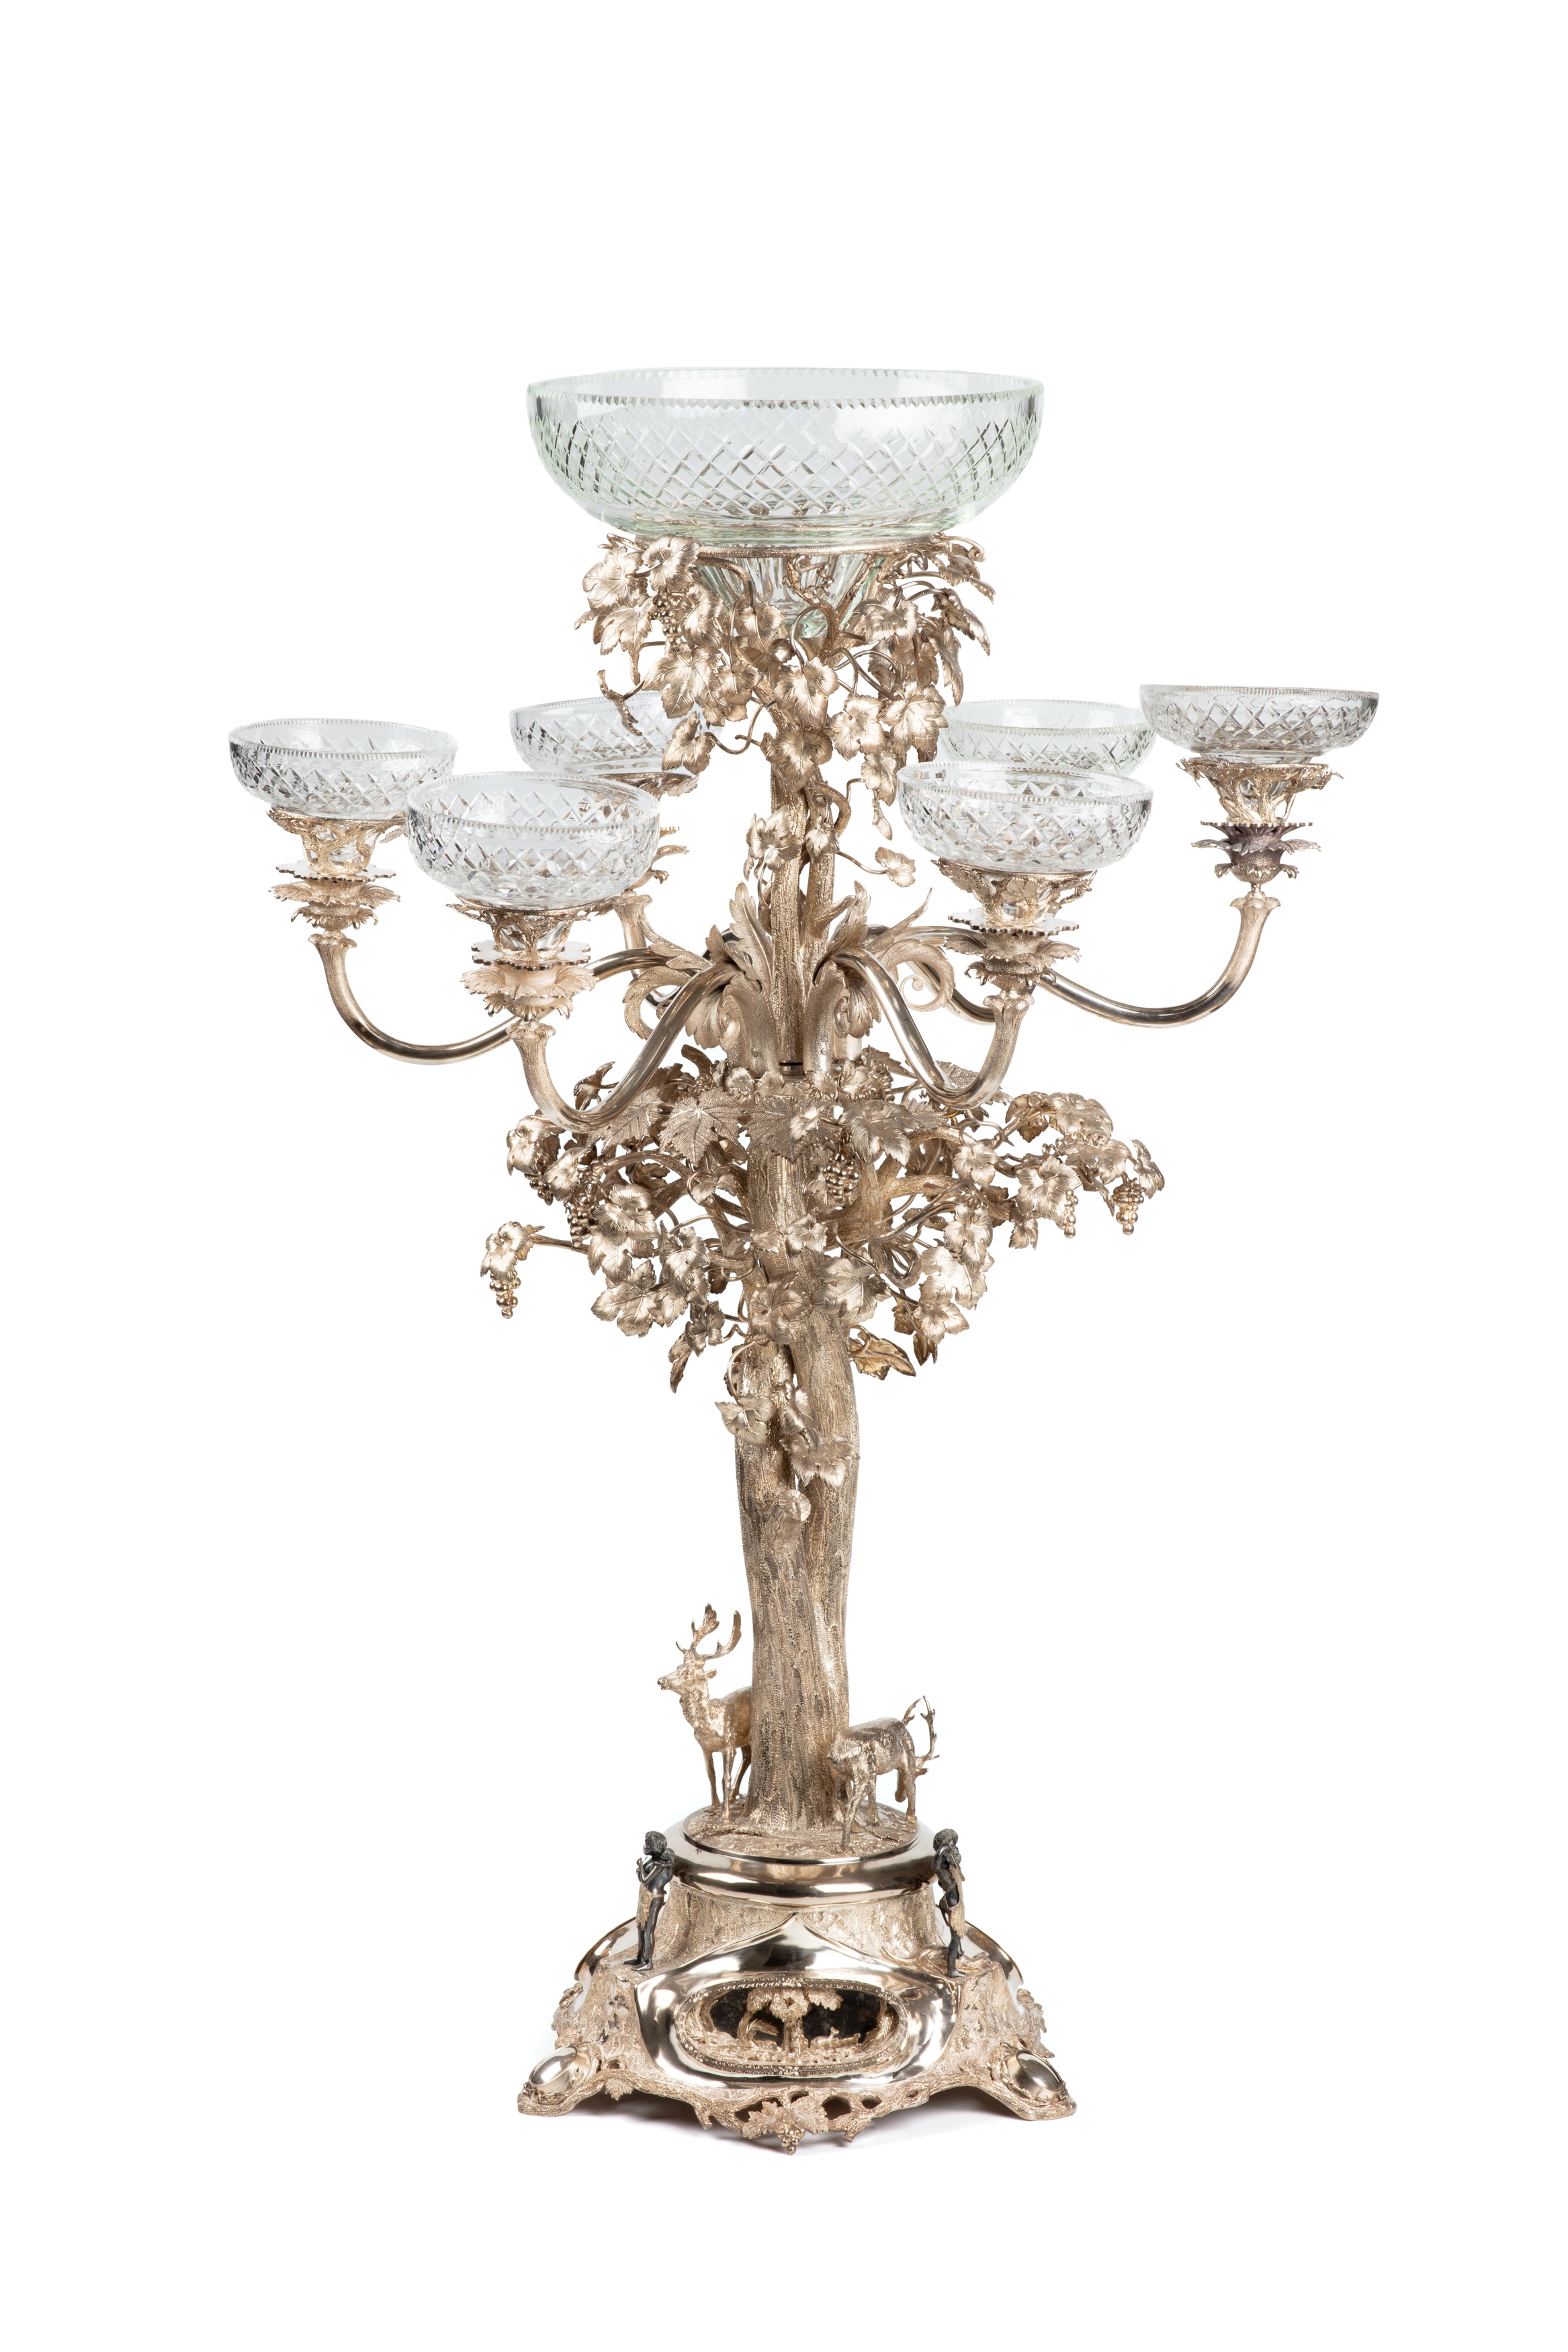 Silver epergne by J Henry Steiner